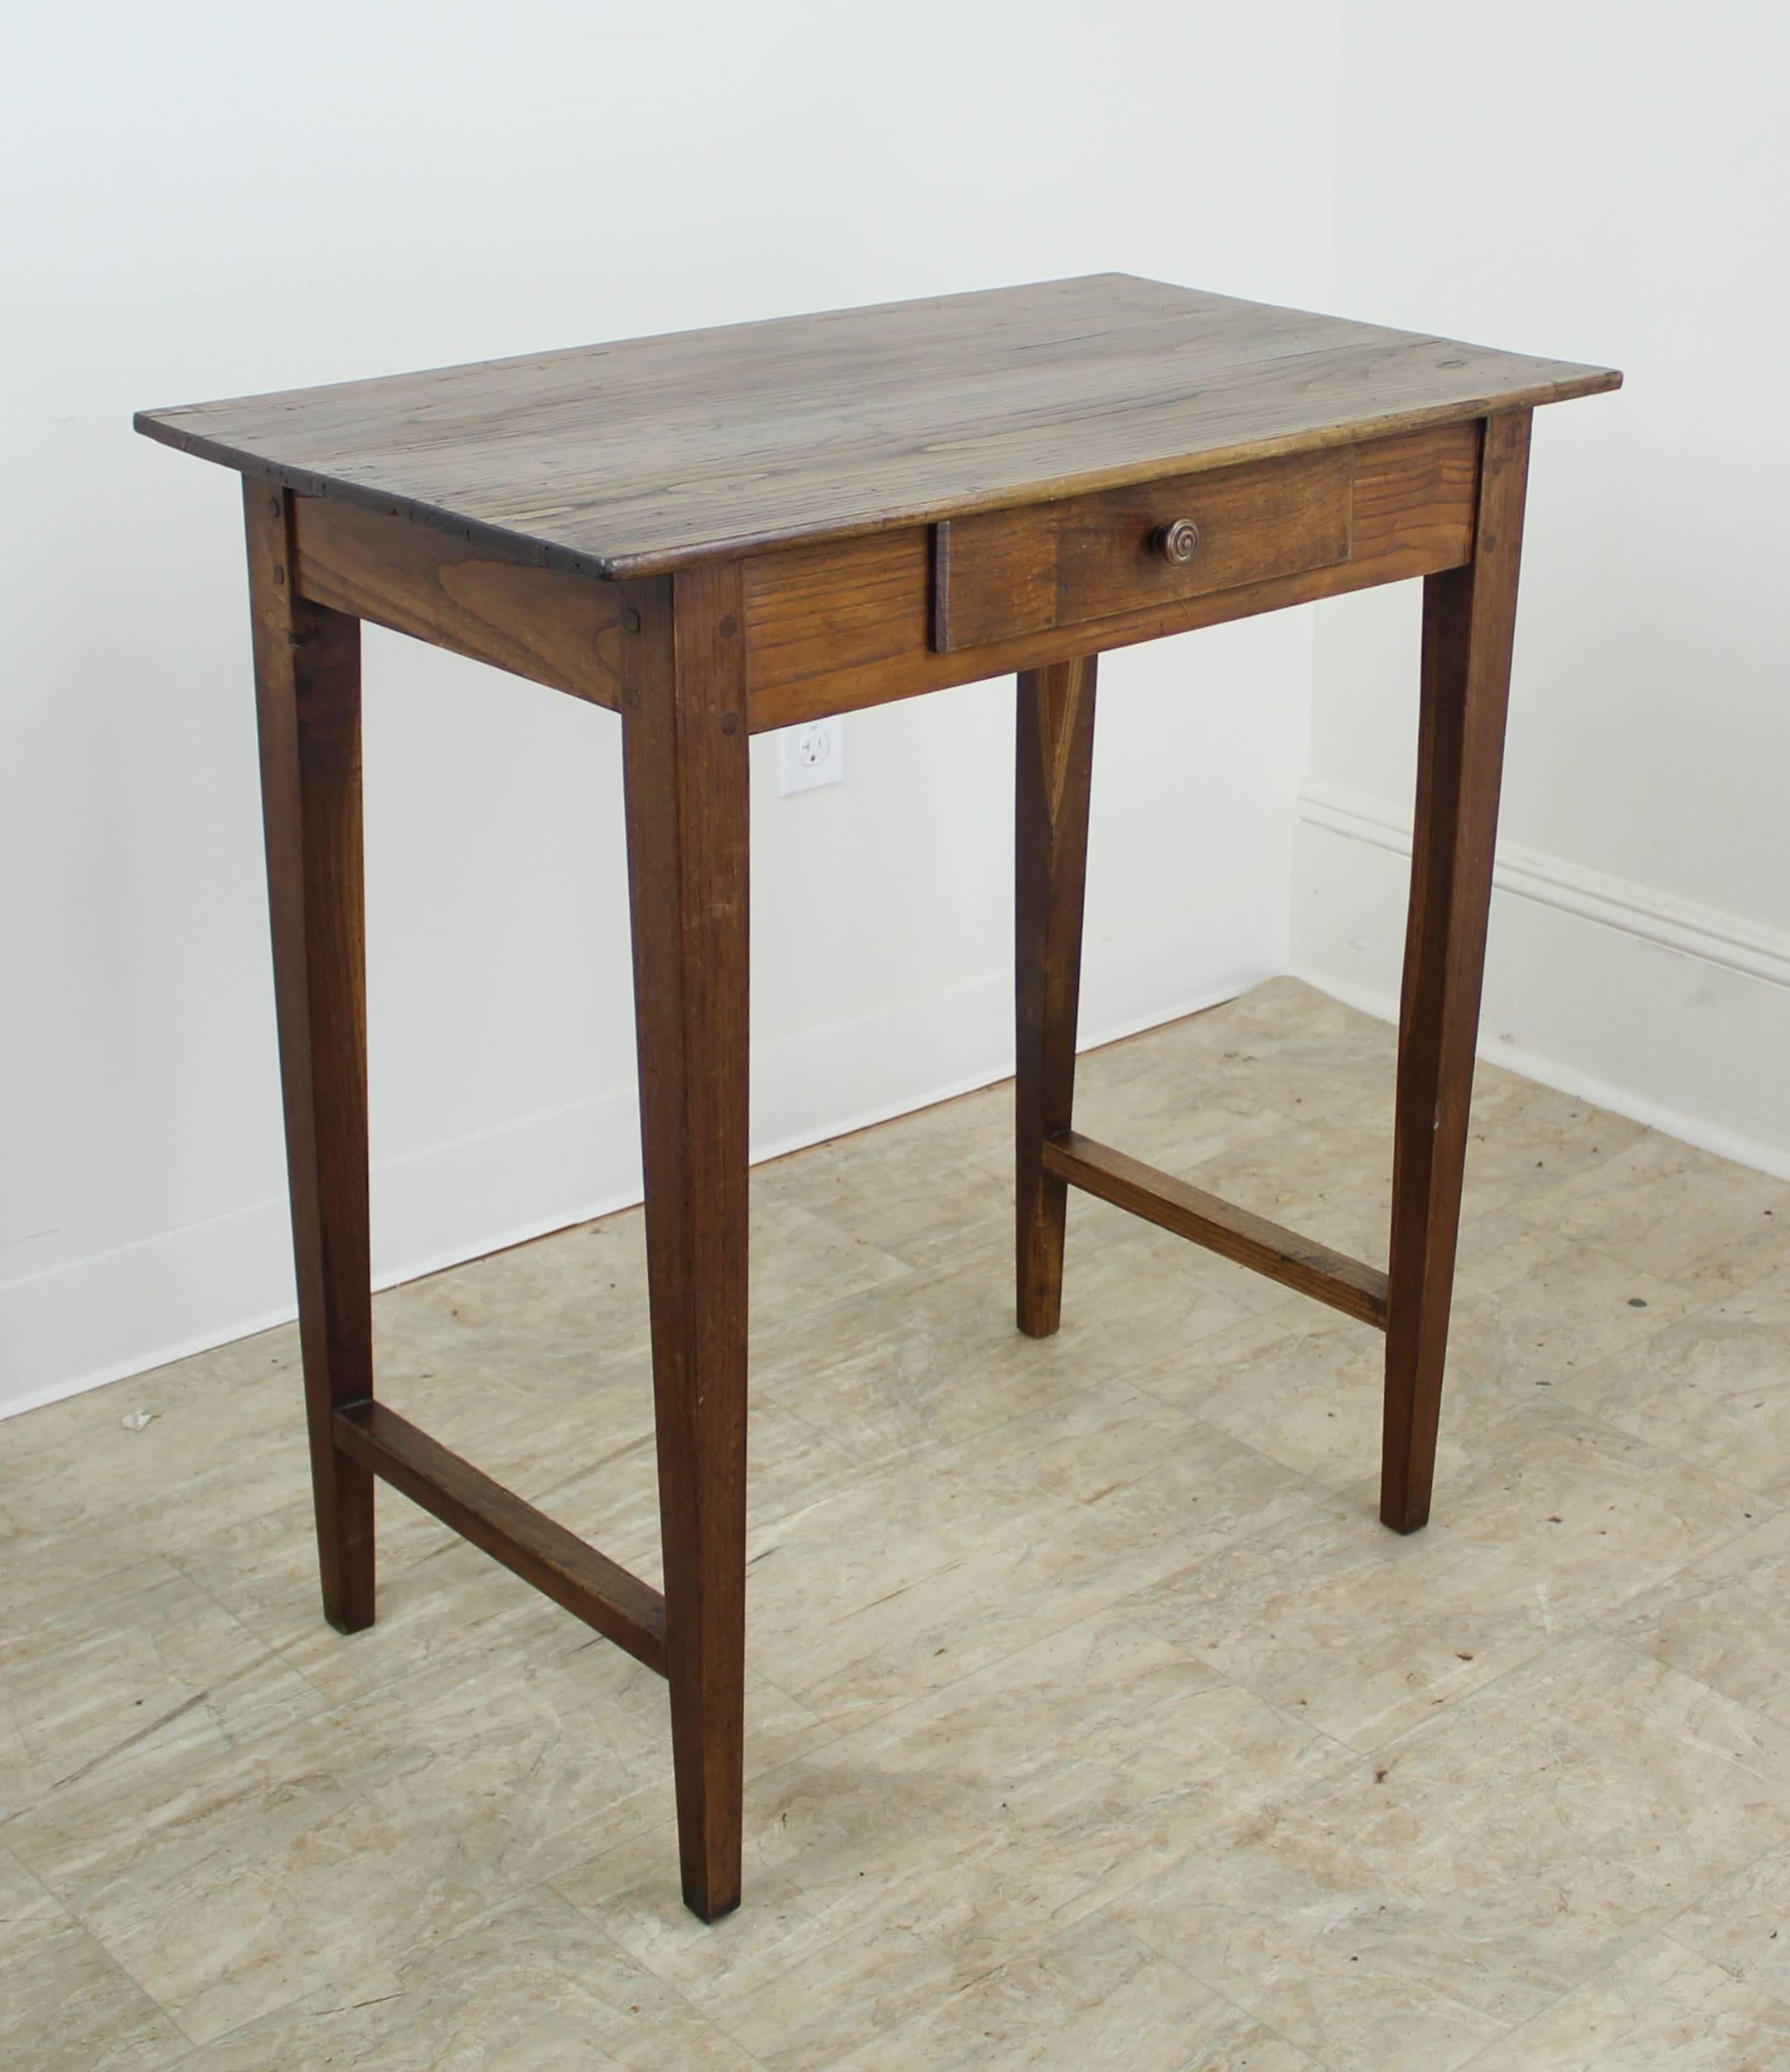 A tall elegant chestnut side table with stretchers at the bottom. The unusual height and single divided drawer make this just right for an entrance hall or as a nightstand next to a high, lofty bed. Wonderful color, grain and patina!